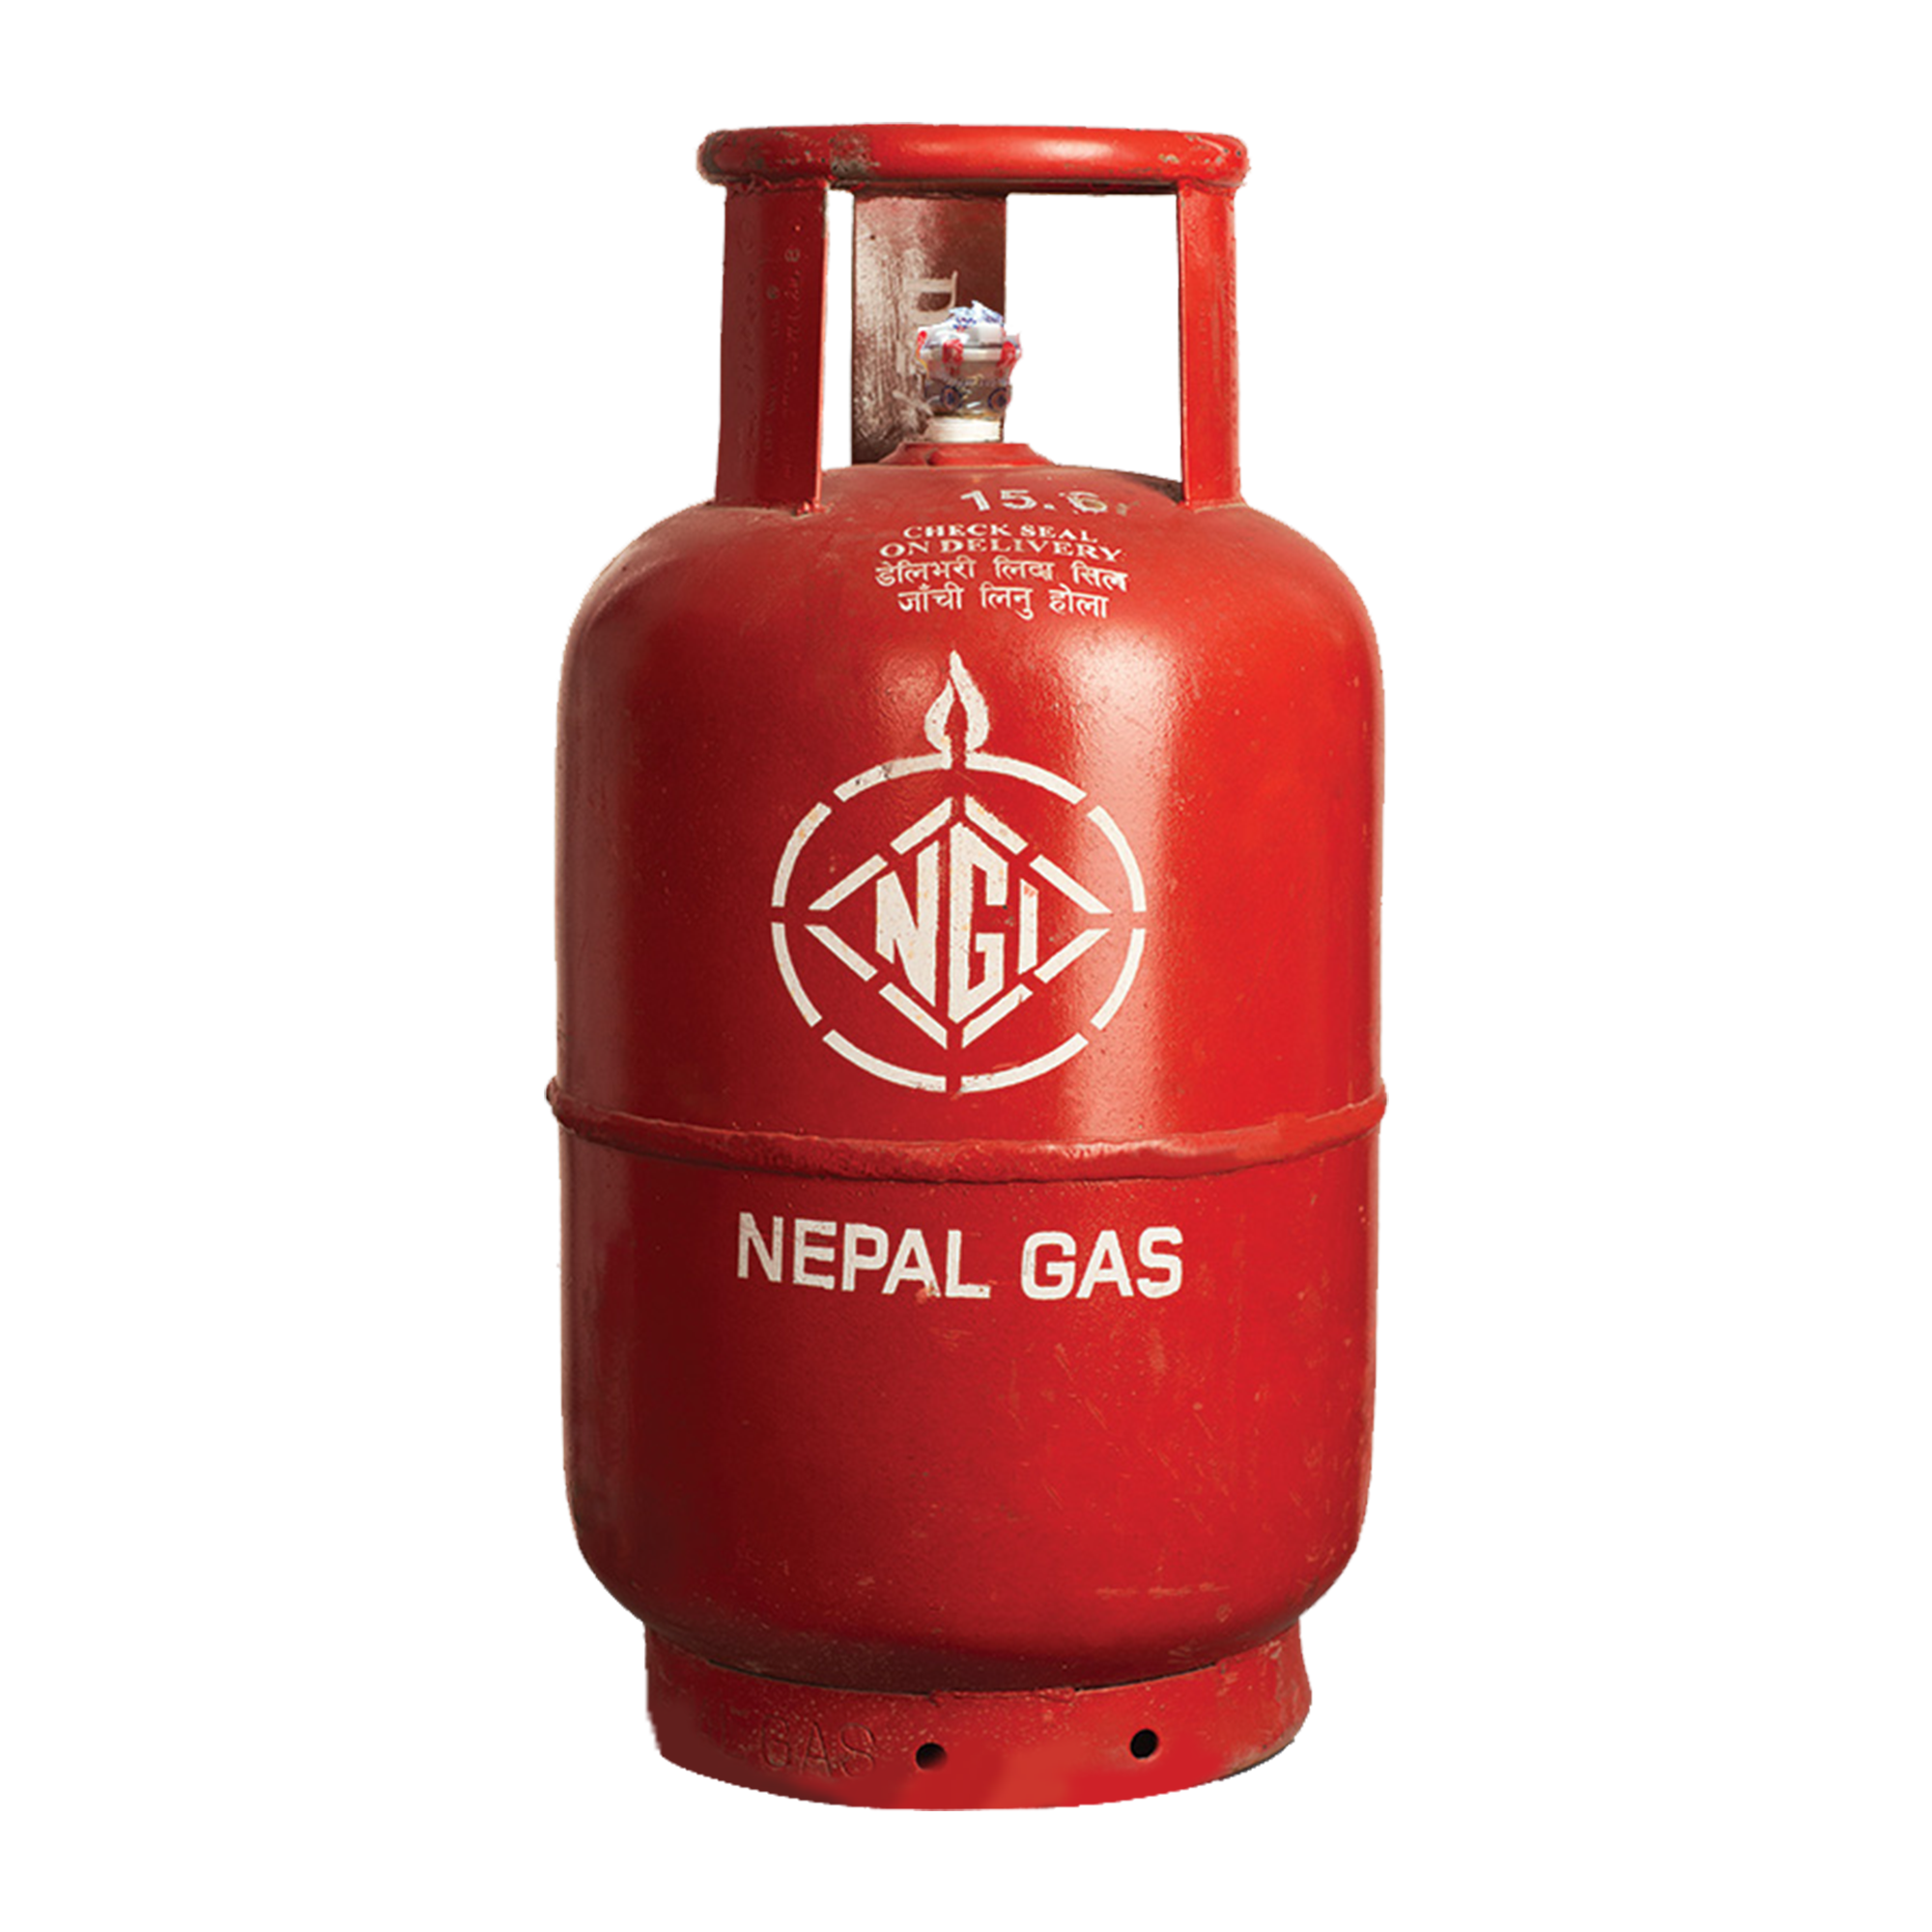 /assets/uploads/product/2021-12-09-12-58-32-GAS2(1).png